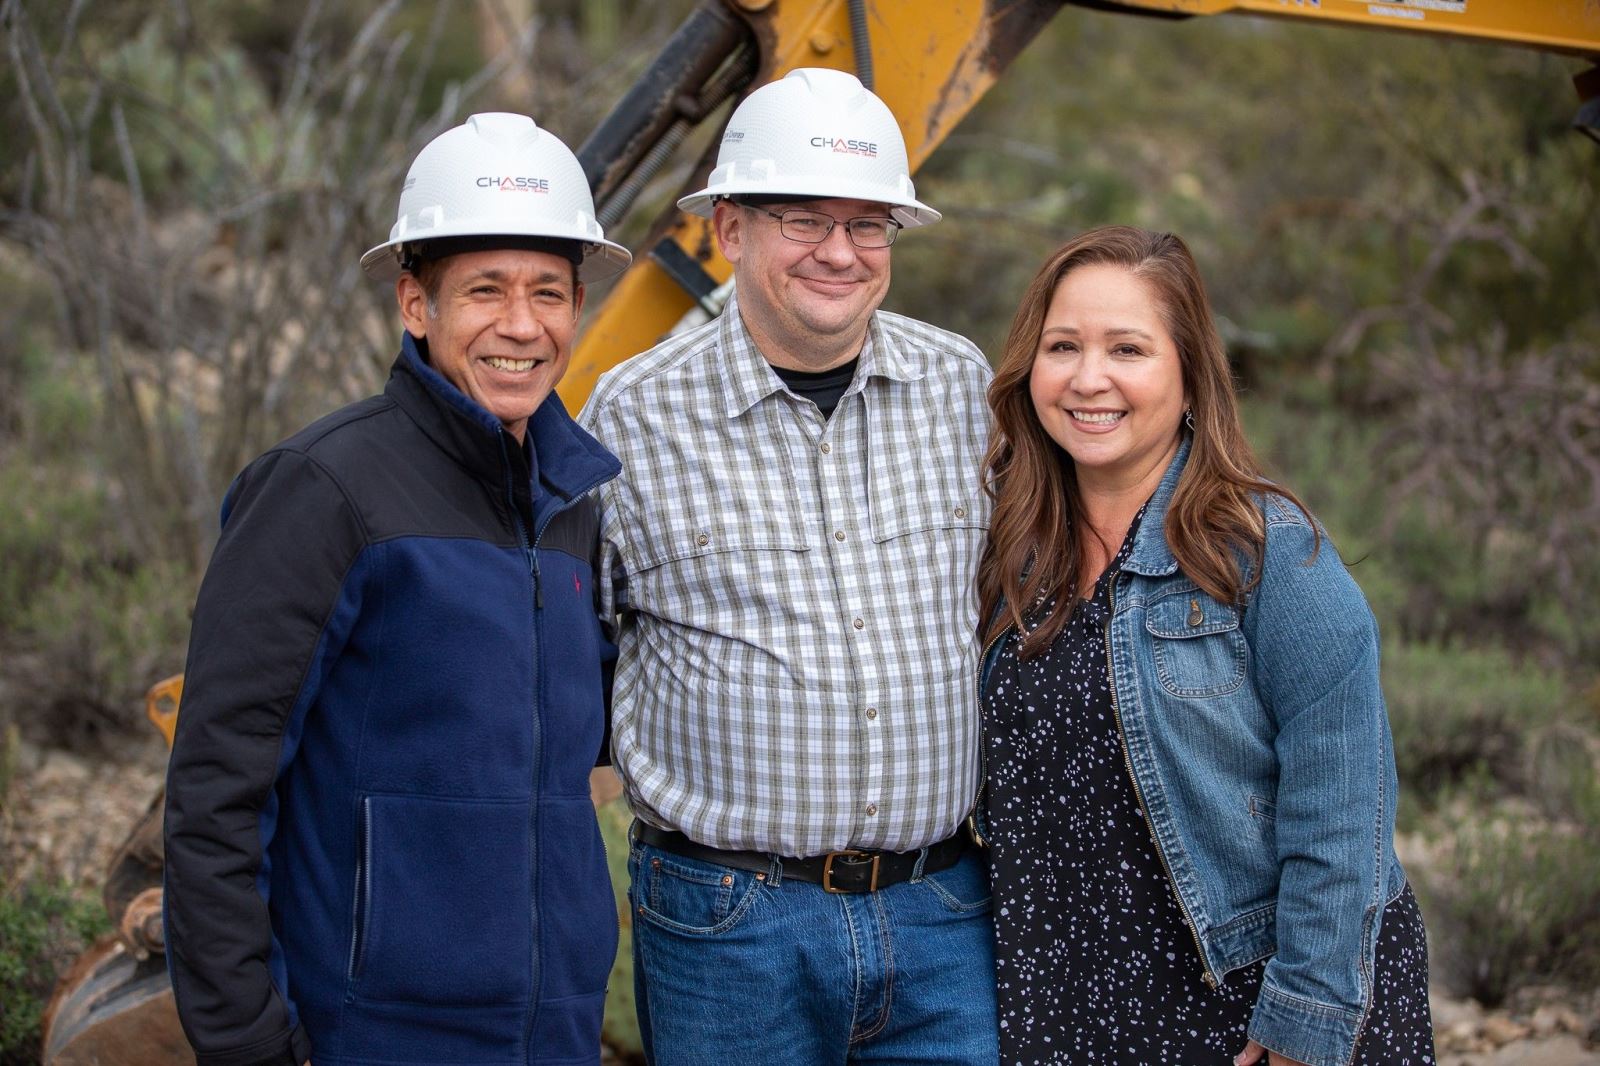 Dr. Trujillo smiles in a hard hat next to a man and a woman at the ribbon cutting at Camp Cooper